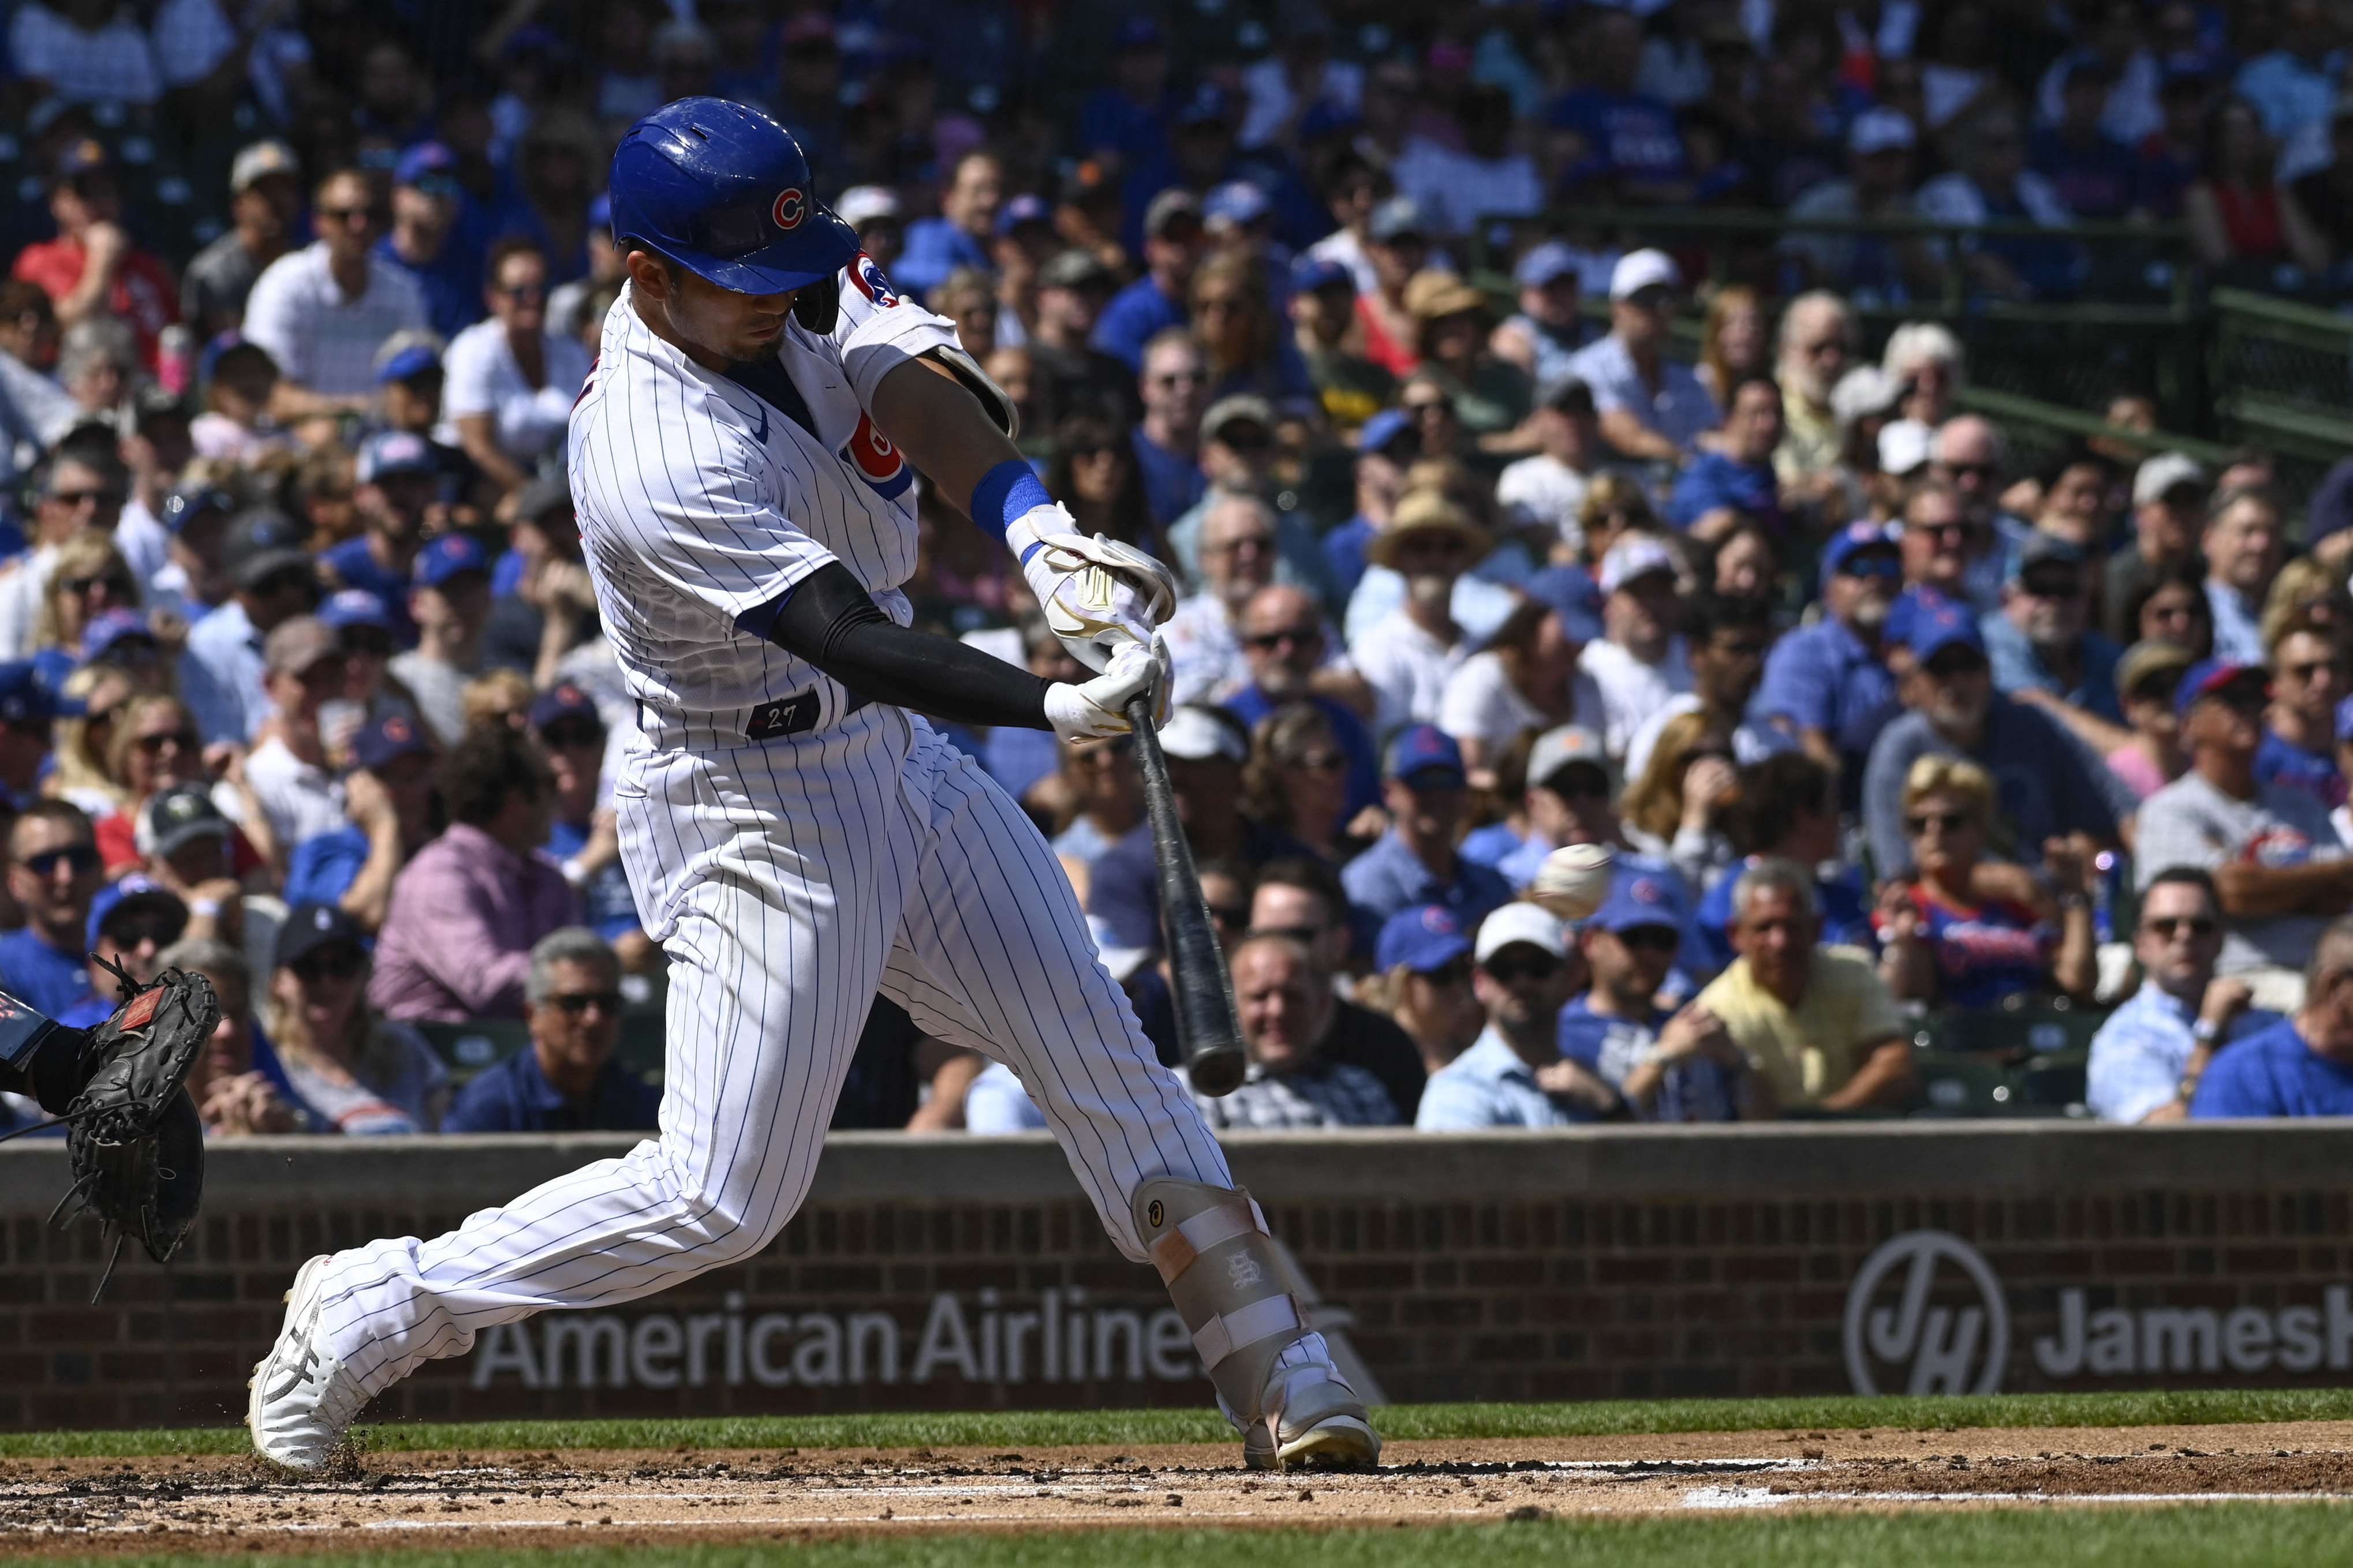 Chicago Cubs keep WINNING as they sweep Giants 